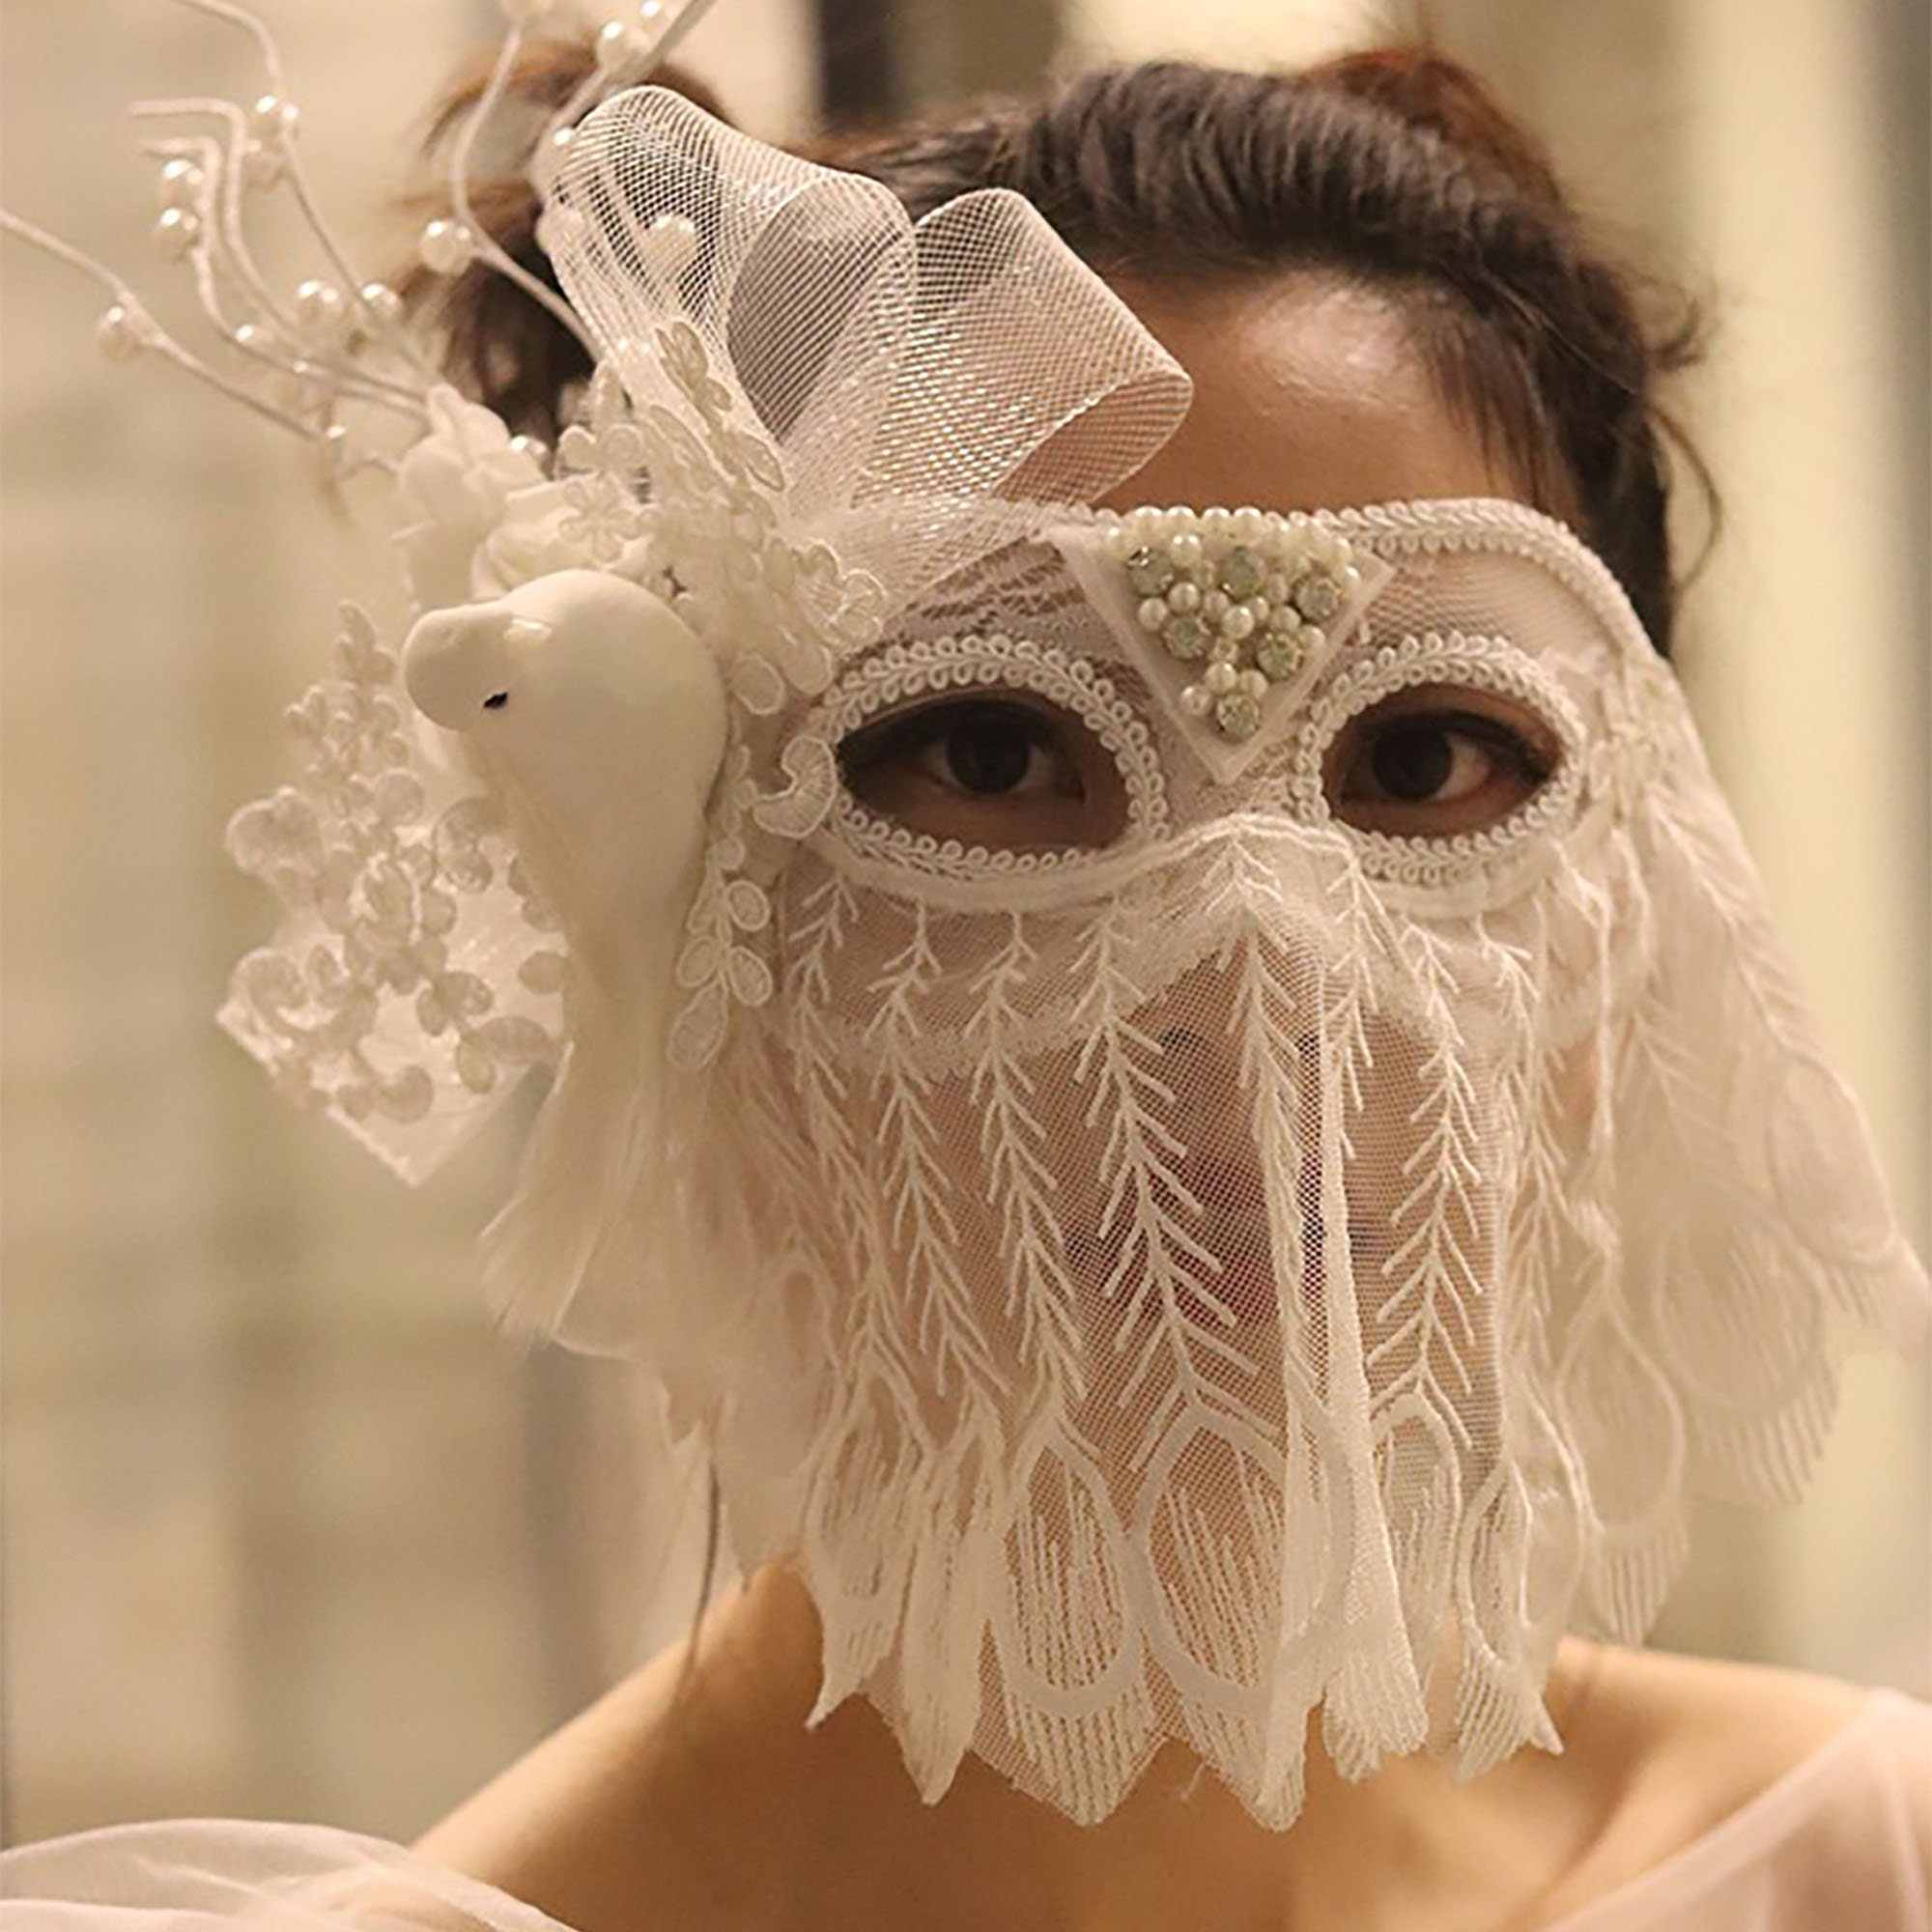 Dazzling White Full Face Plastic Mask (6.25 x 7.75) - 1 Pc - Perfect for  DIY Projects & Themed Parties